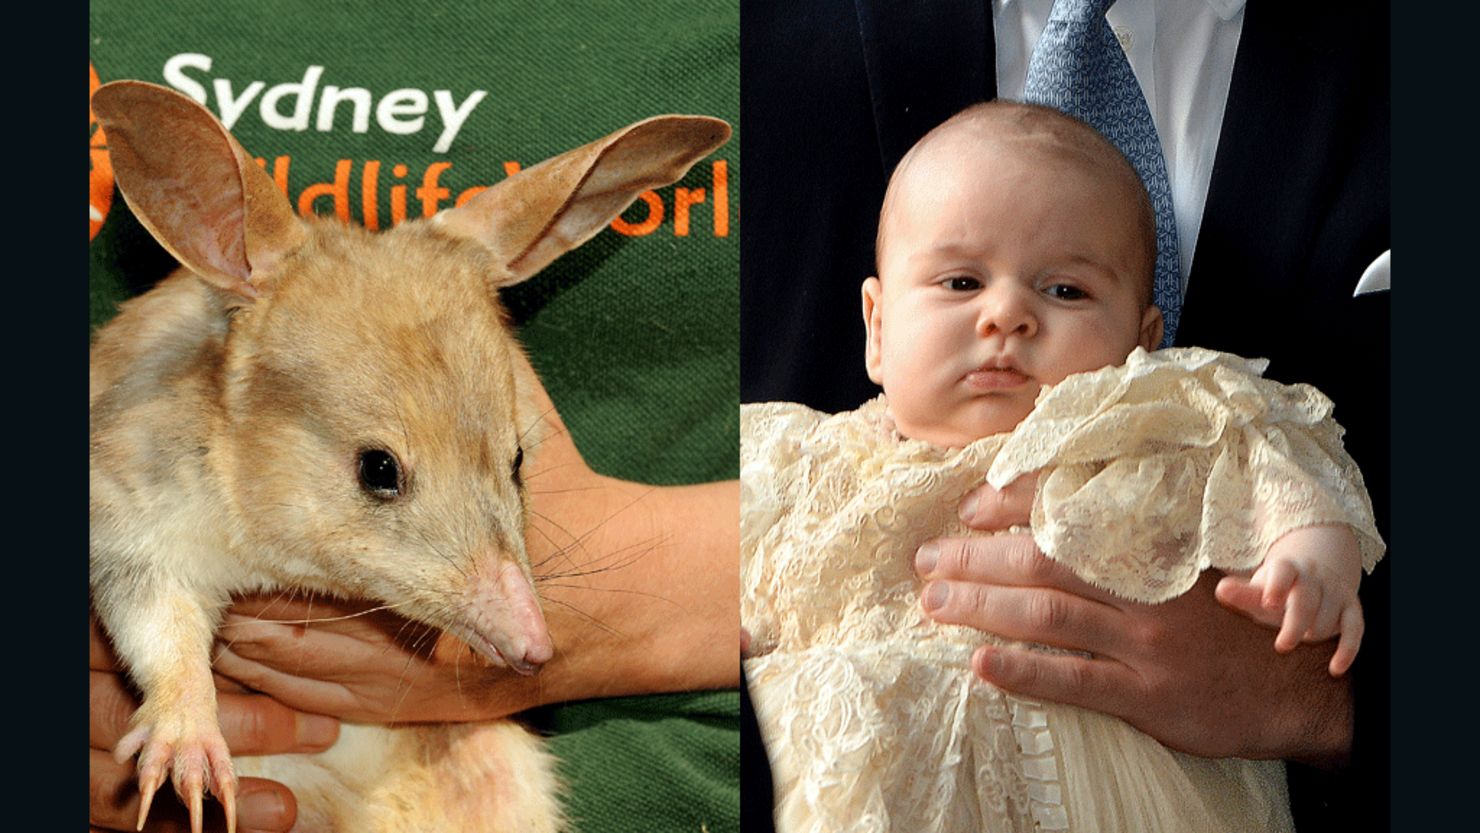 Canberra made a donation to Taronga Zoo's bilby preservation program when Prince George was born. It's unclear if he'll visit.